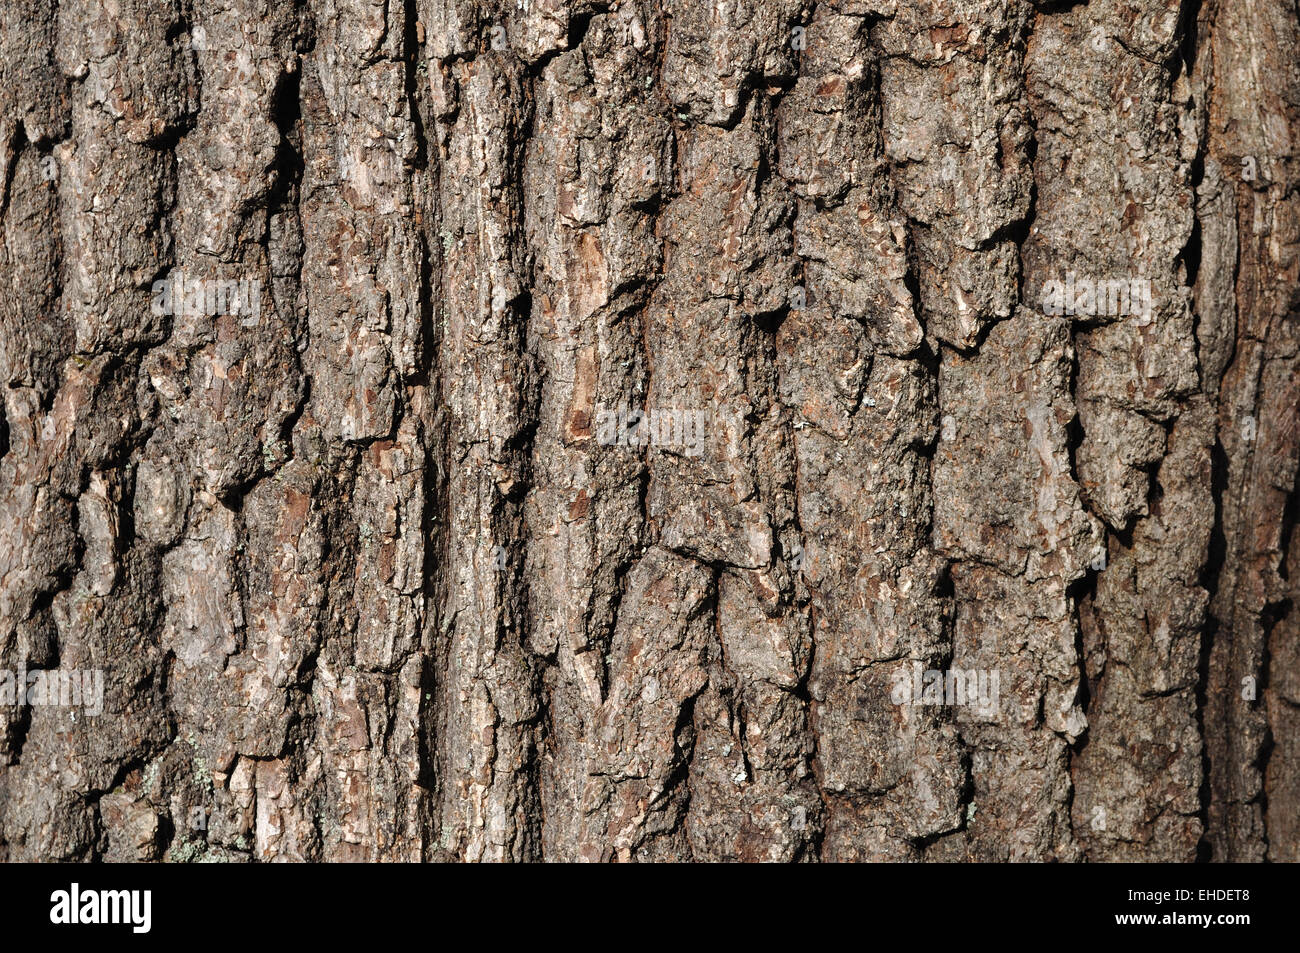 Close up of old oak bark surface texture Stock Photo